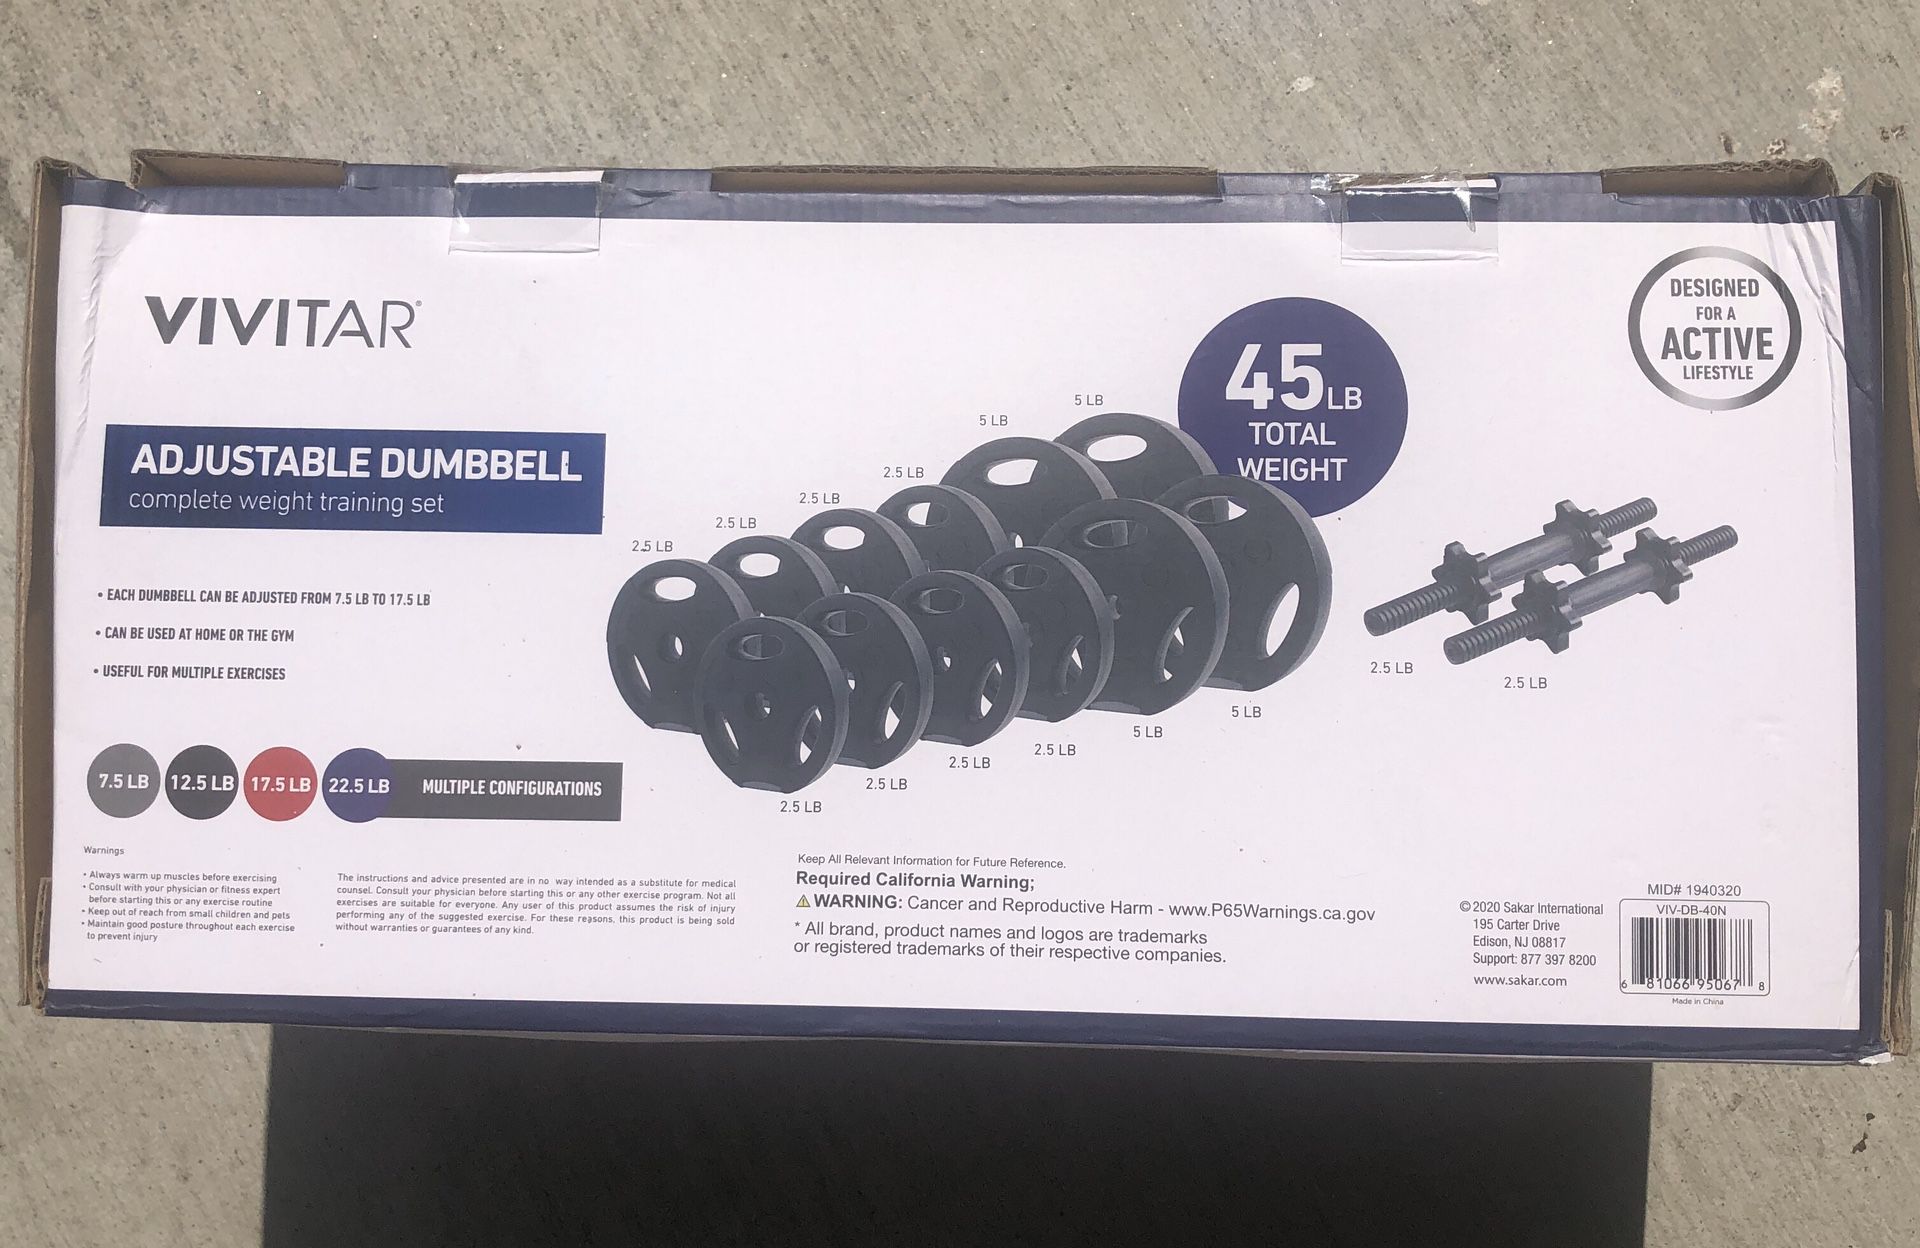 NEW - Vivitar Adjustable Dumbell Set 45lbs Total Weight Gym Workout